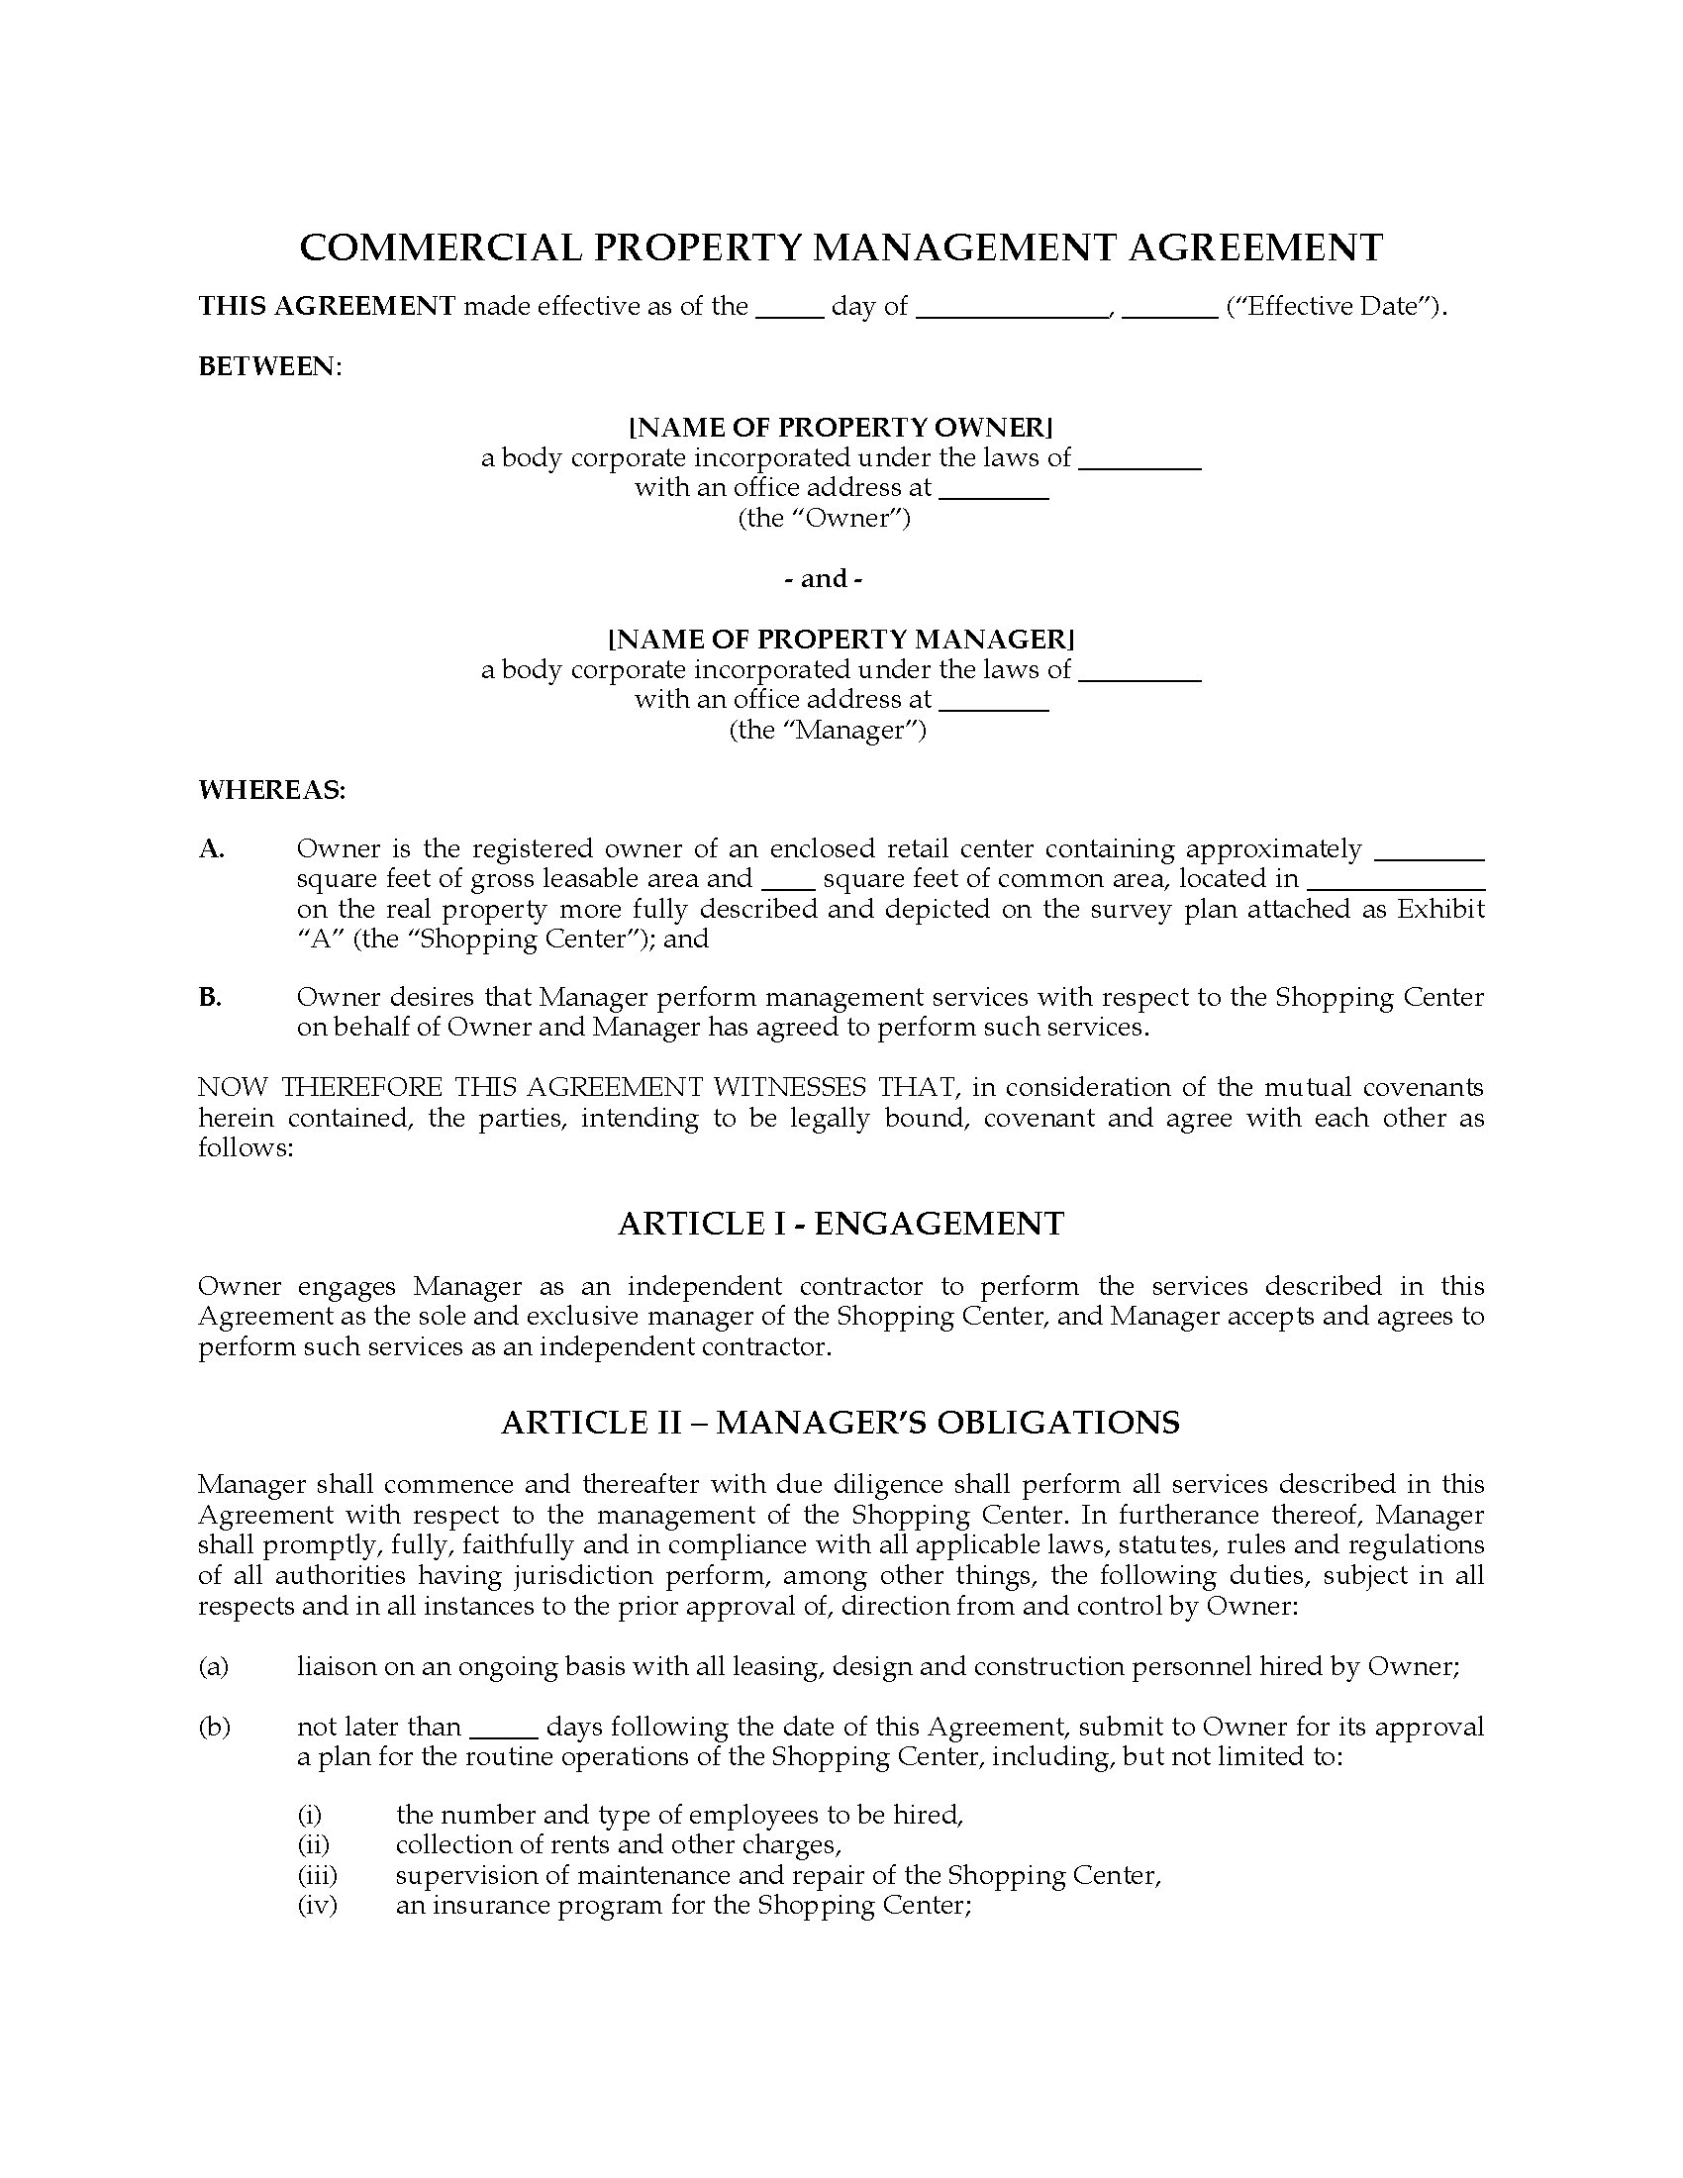 Shopping Center Property Management Agreement | Legal Forms And Throughout Free Commercial Property Management Agreement Template